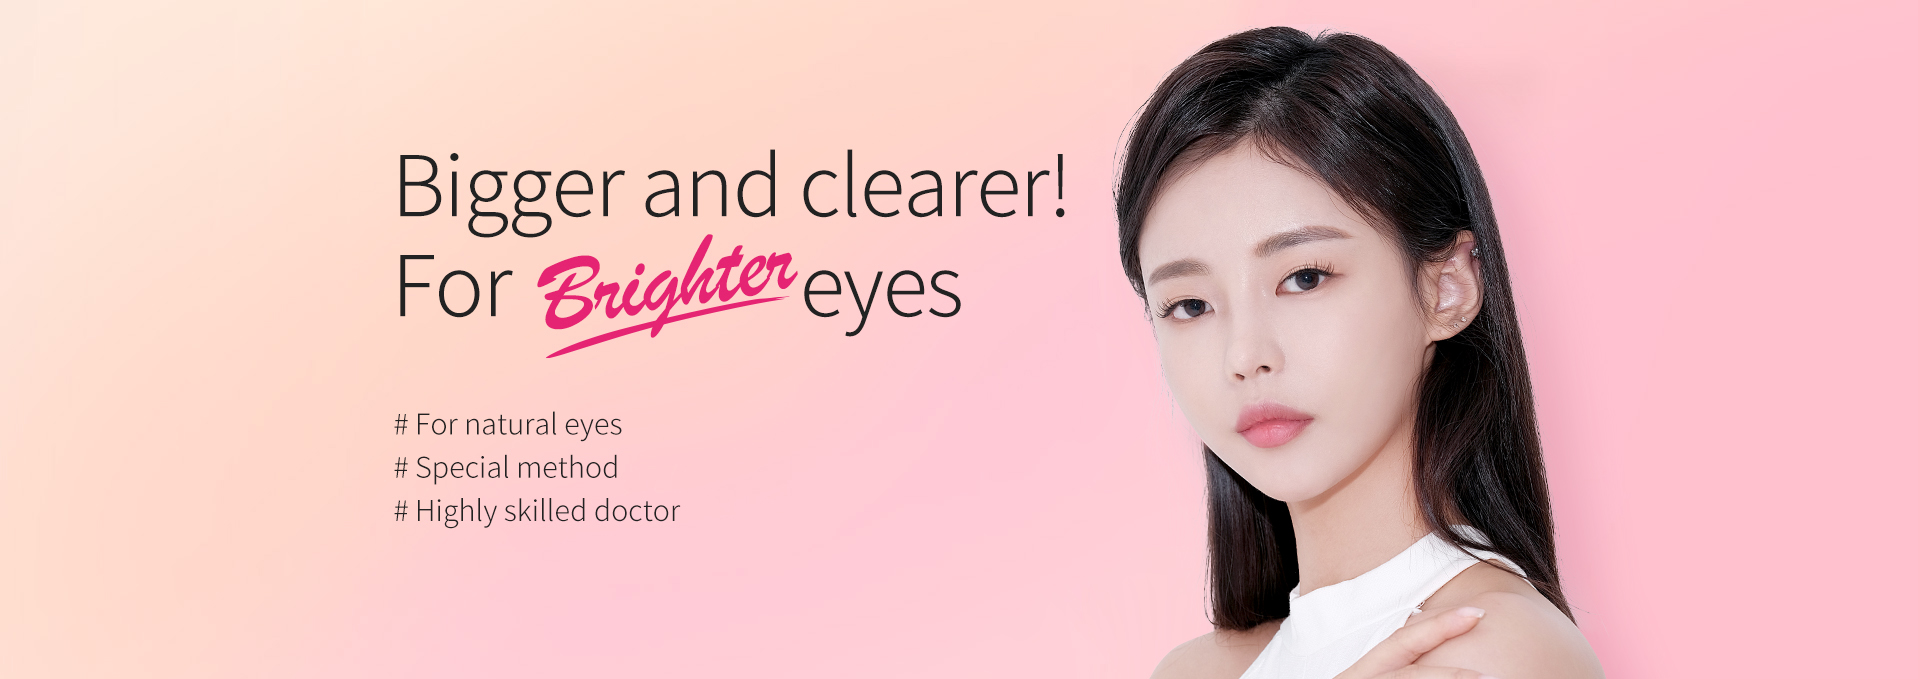 Bigger and clearer! For Brighter eyes